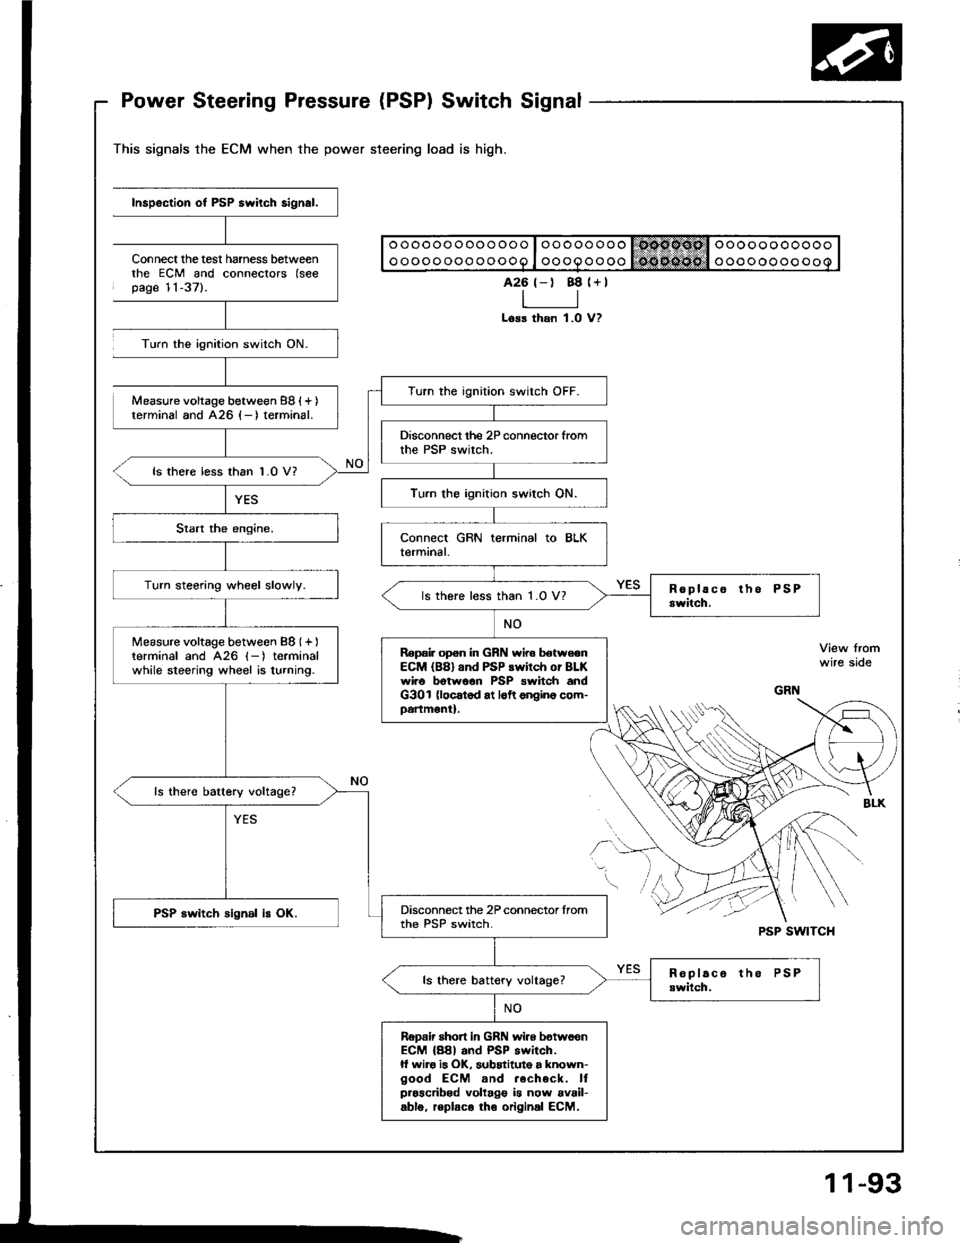 ACURA INTEGRA 1994  Service Repair Manual Power Steering Pressure (PSP) Switch Signal
This signals the ECM when the power steering load
-;"nection.*."------.ill]
--
;;;;;;;l w
;:"r"tffa;i 
connecrors (see
Turn the ignition switch ON.
Measur